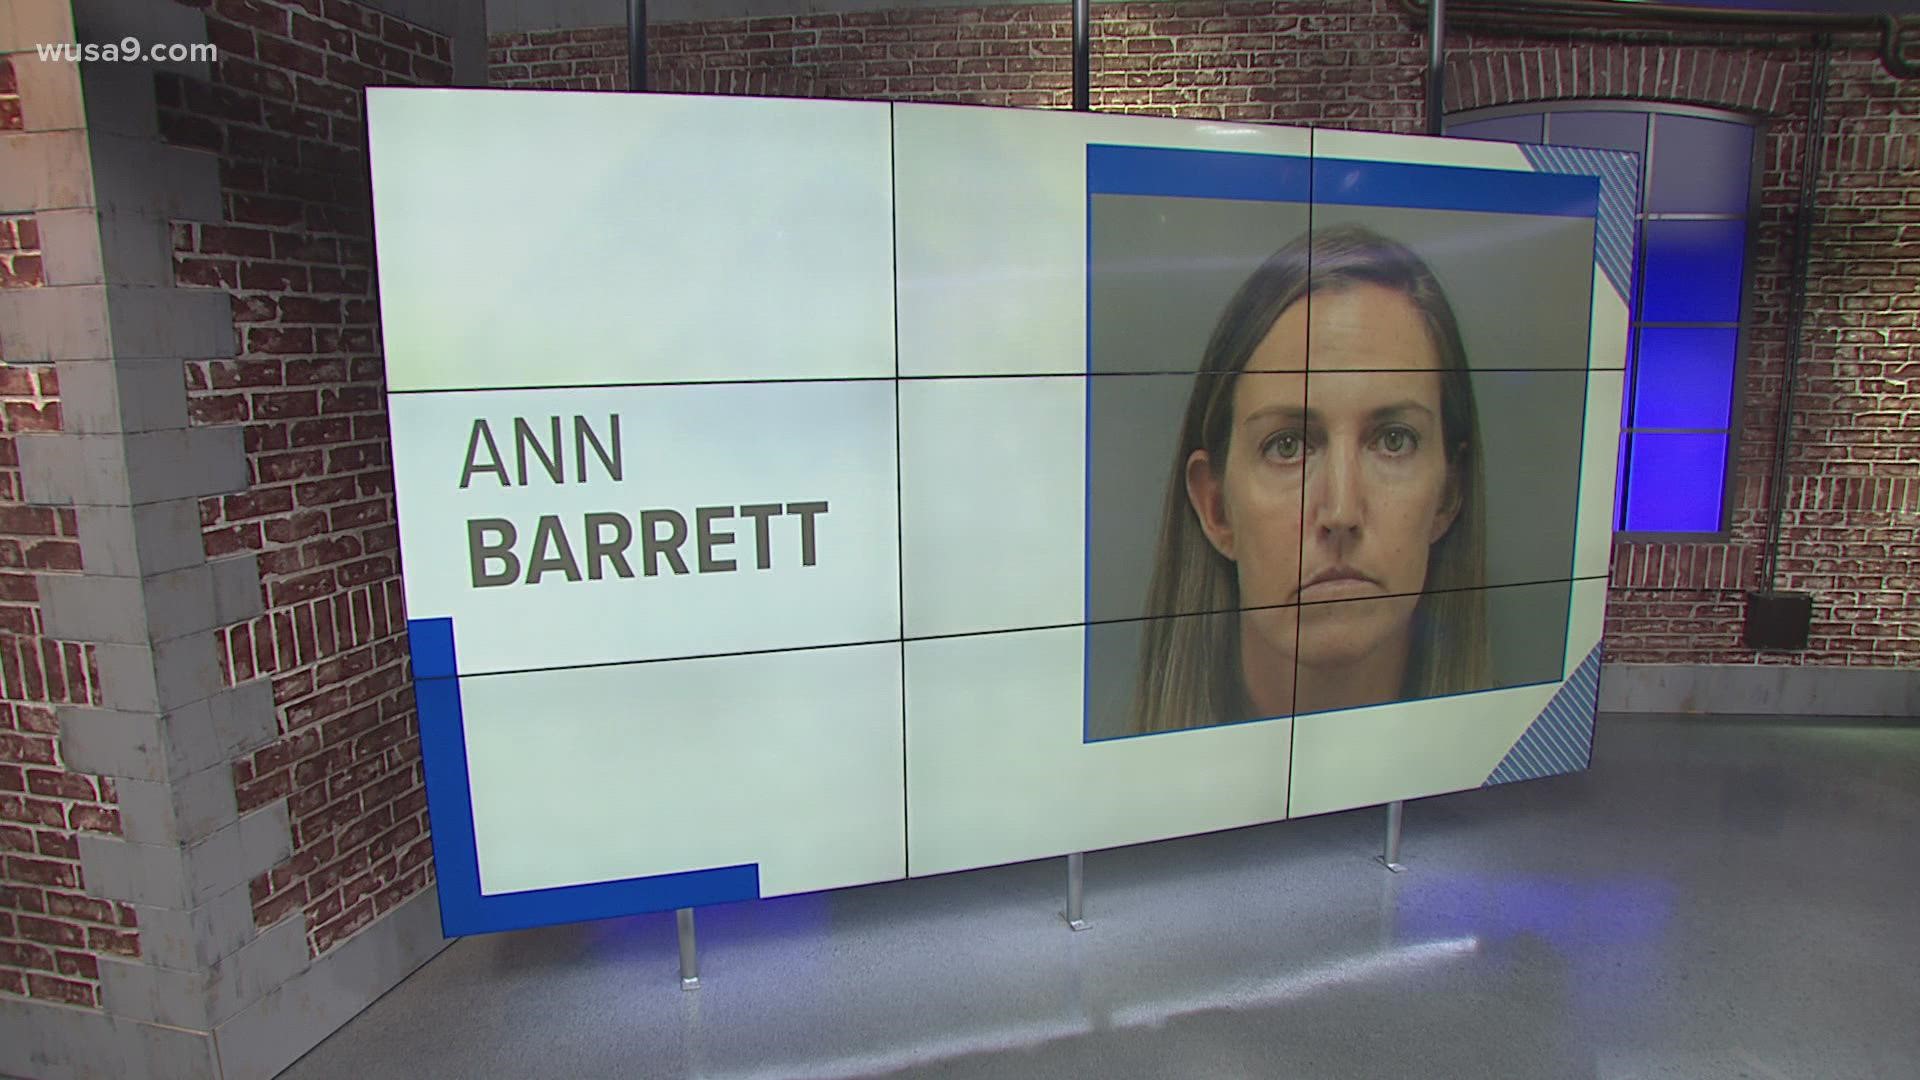 Barrett was placed on leave in May as soon as the allegations were made.